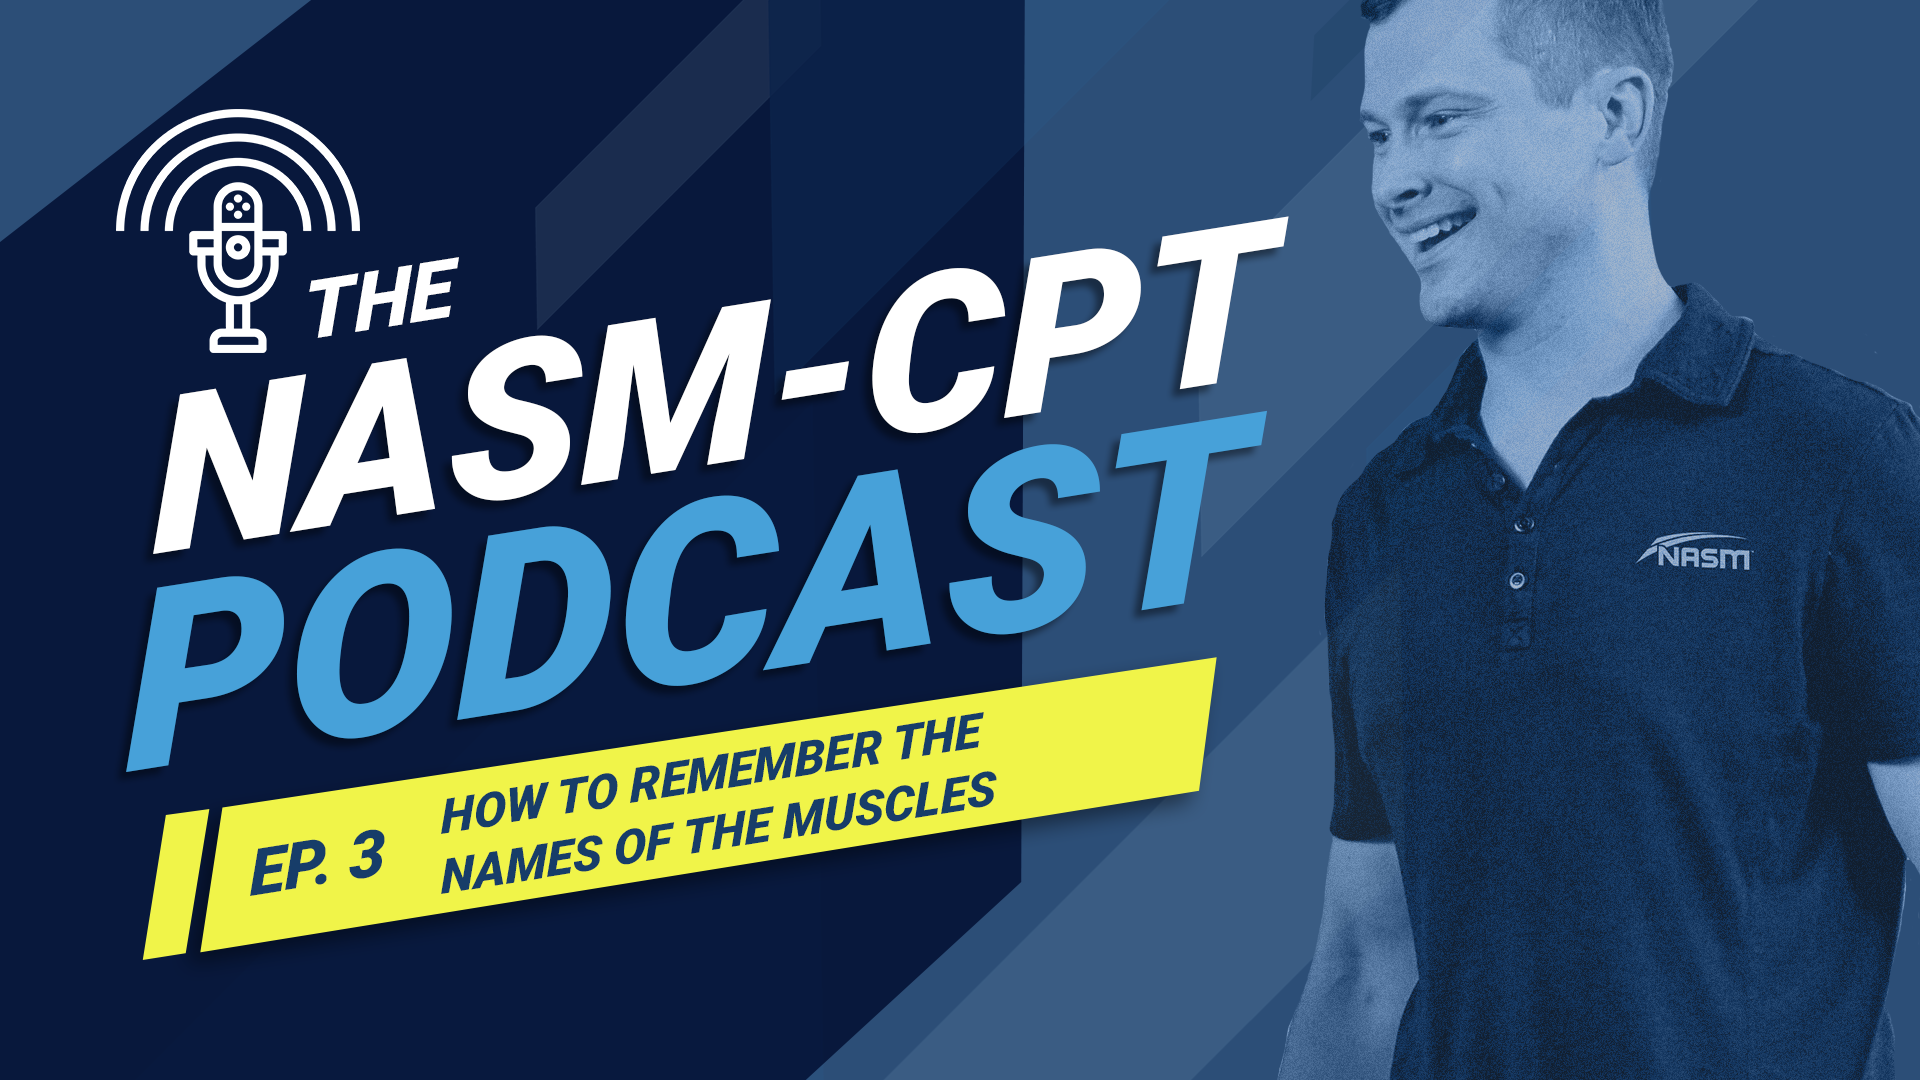 The Nasm Cpt Podcast How To Remember Names Of Muscles